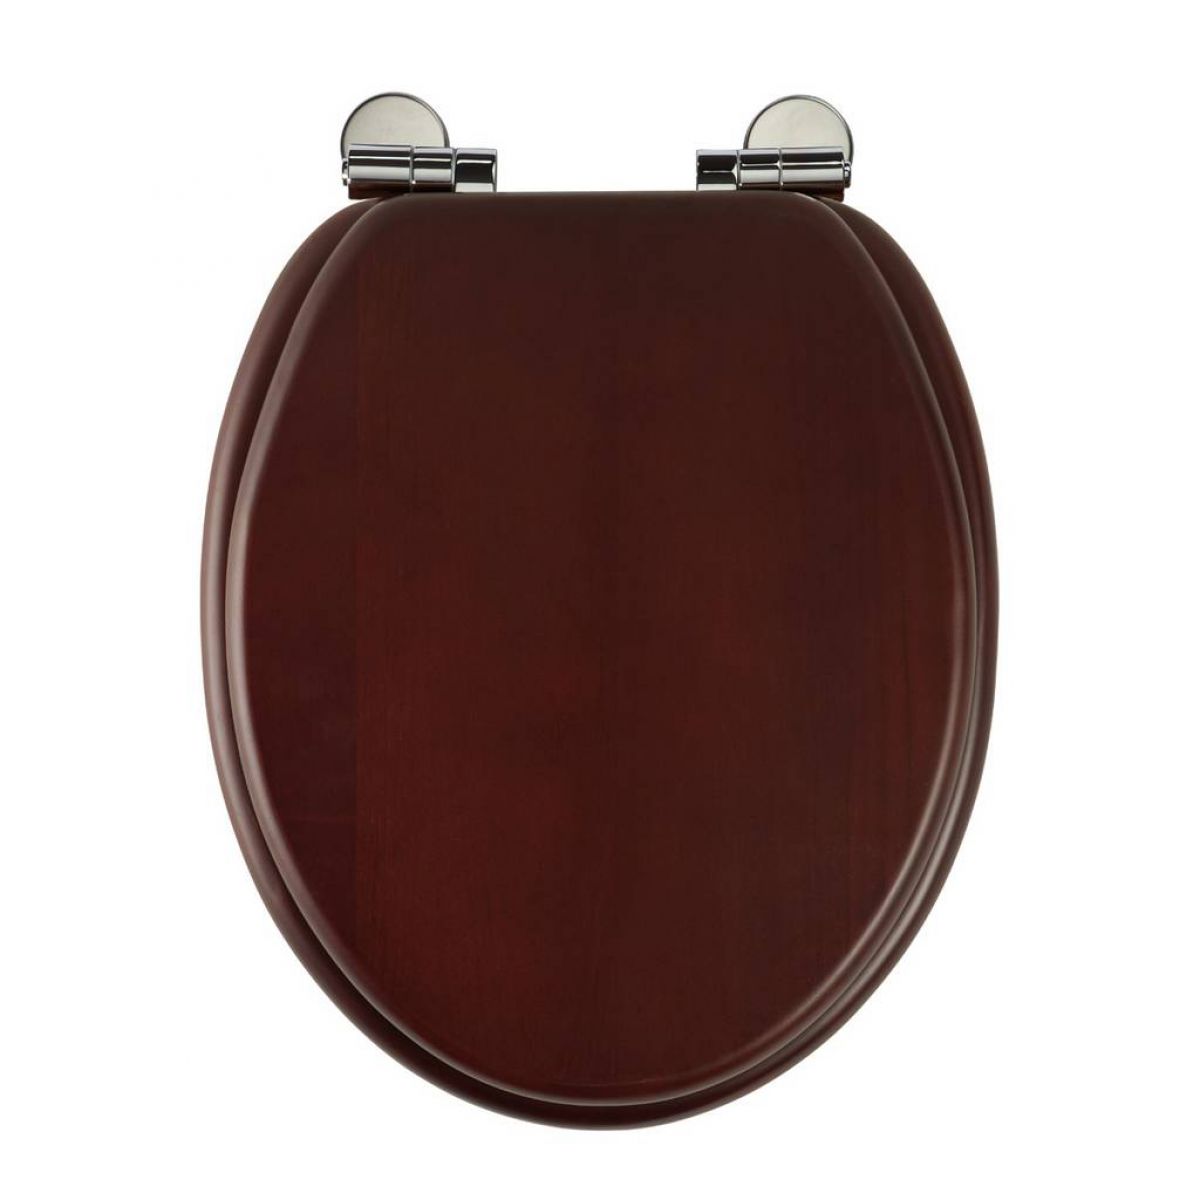 Roper Rhodes Traditional Soft Close Toilet Seat Uk Bathrooms